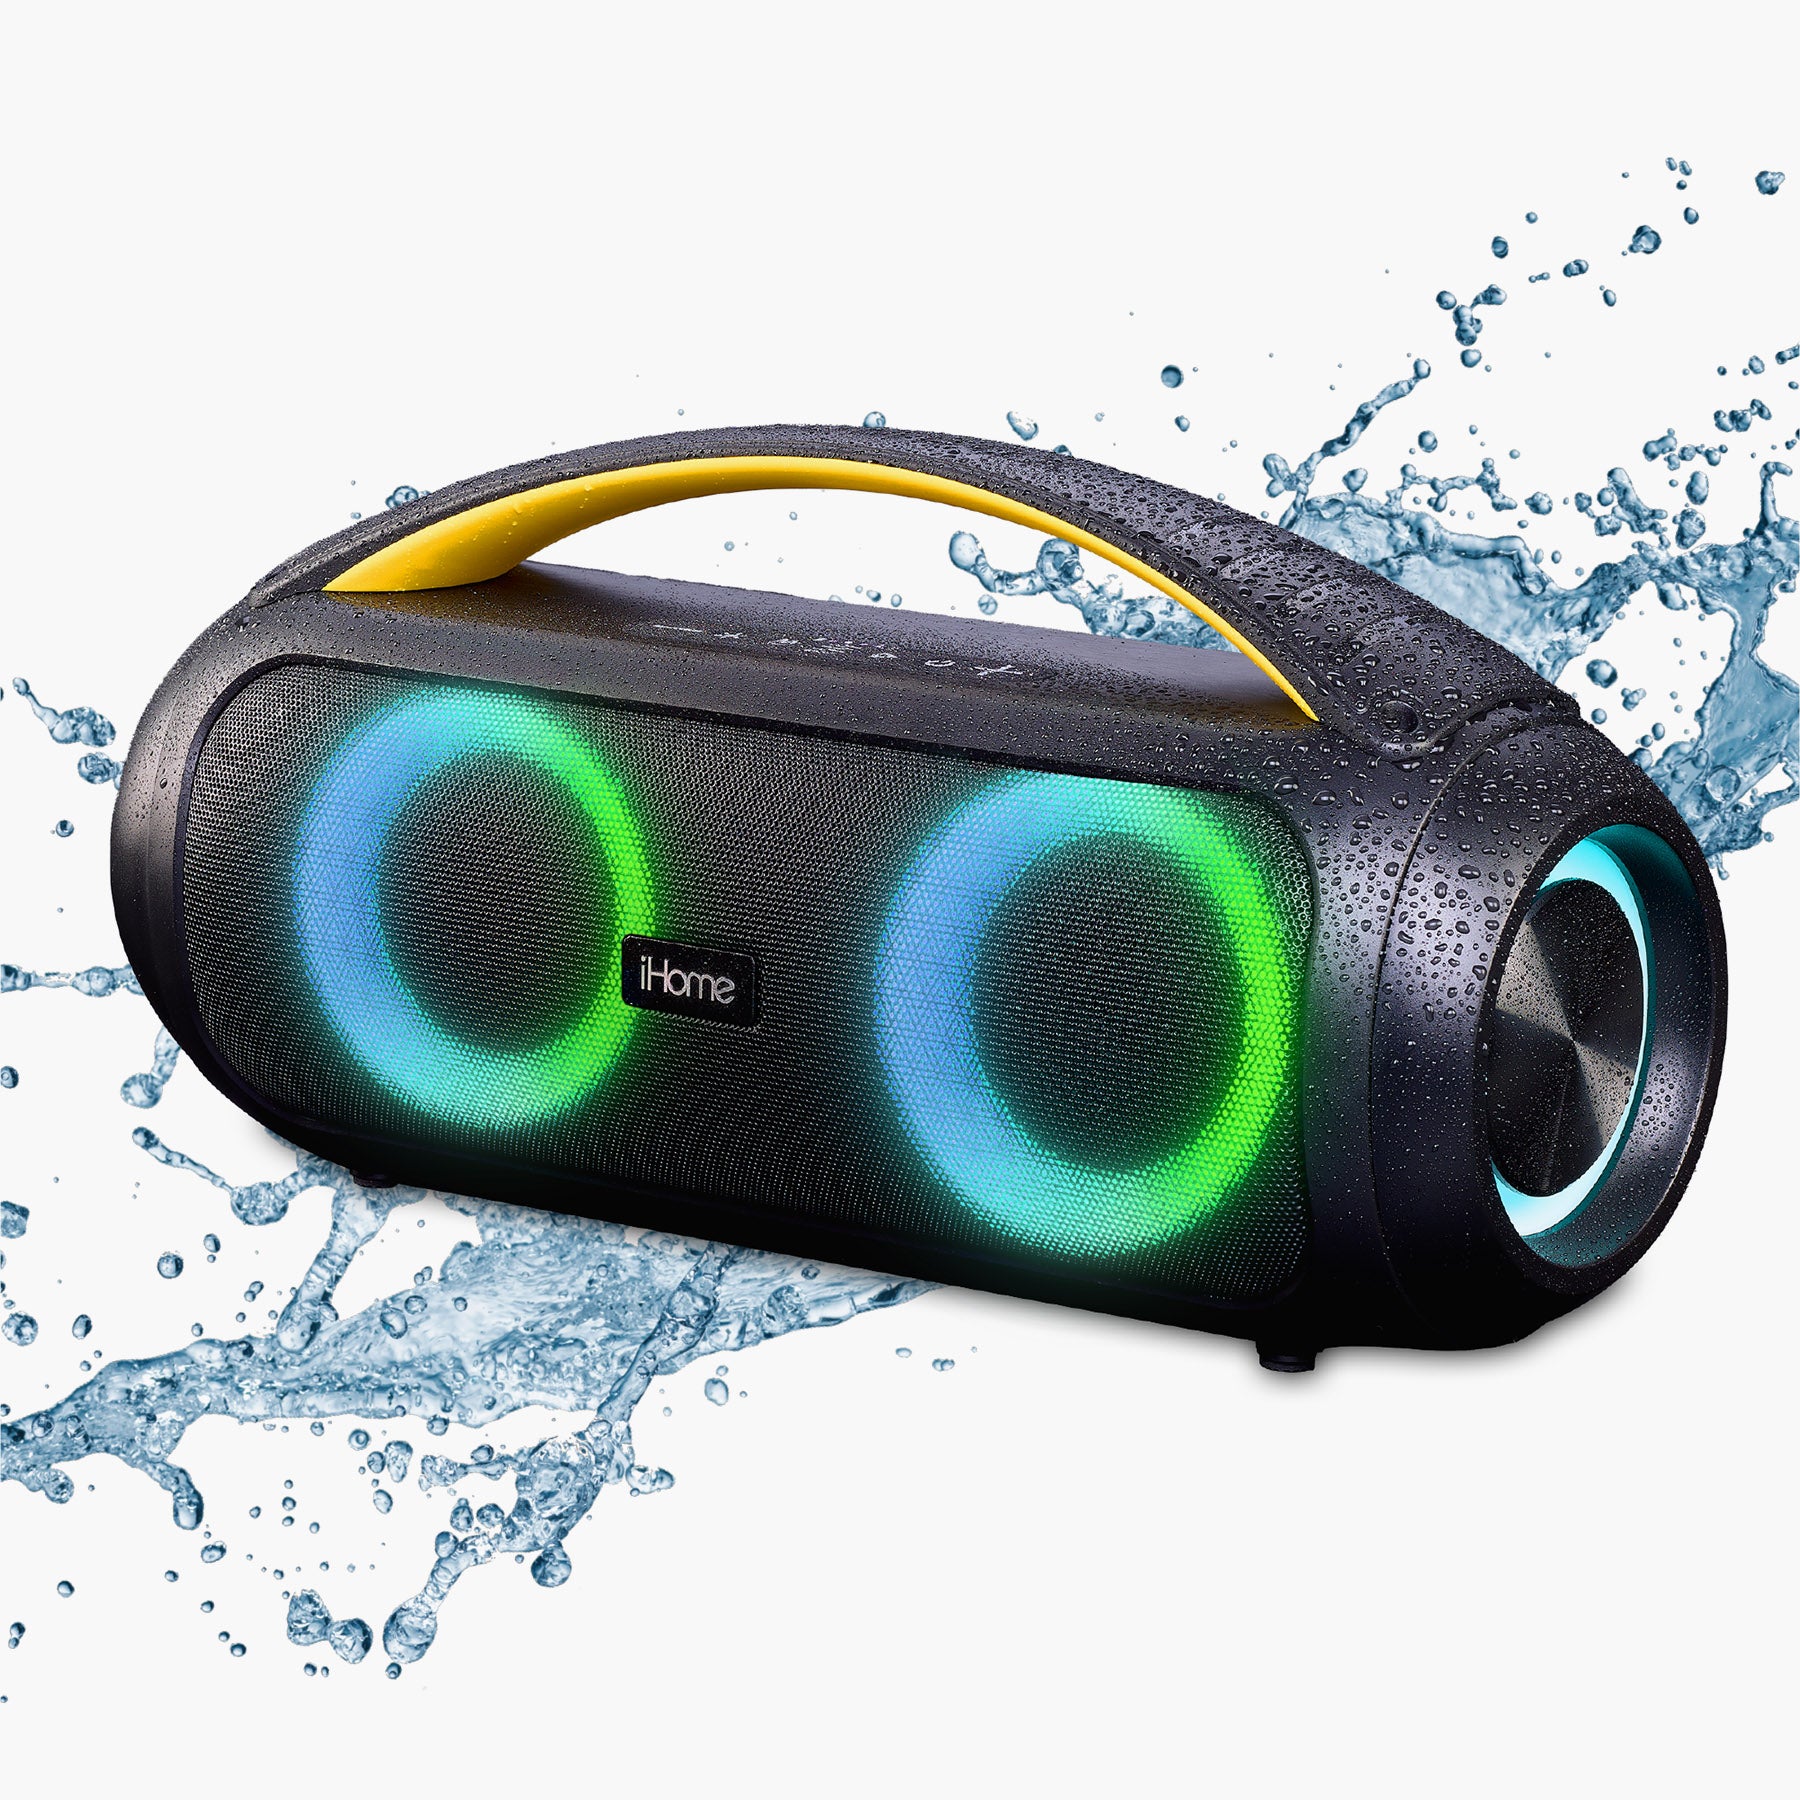 Bluetooth Speaker Boombox with FM Radio, Color Changing Lights and Rem